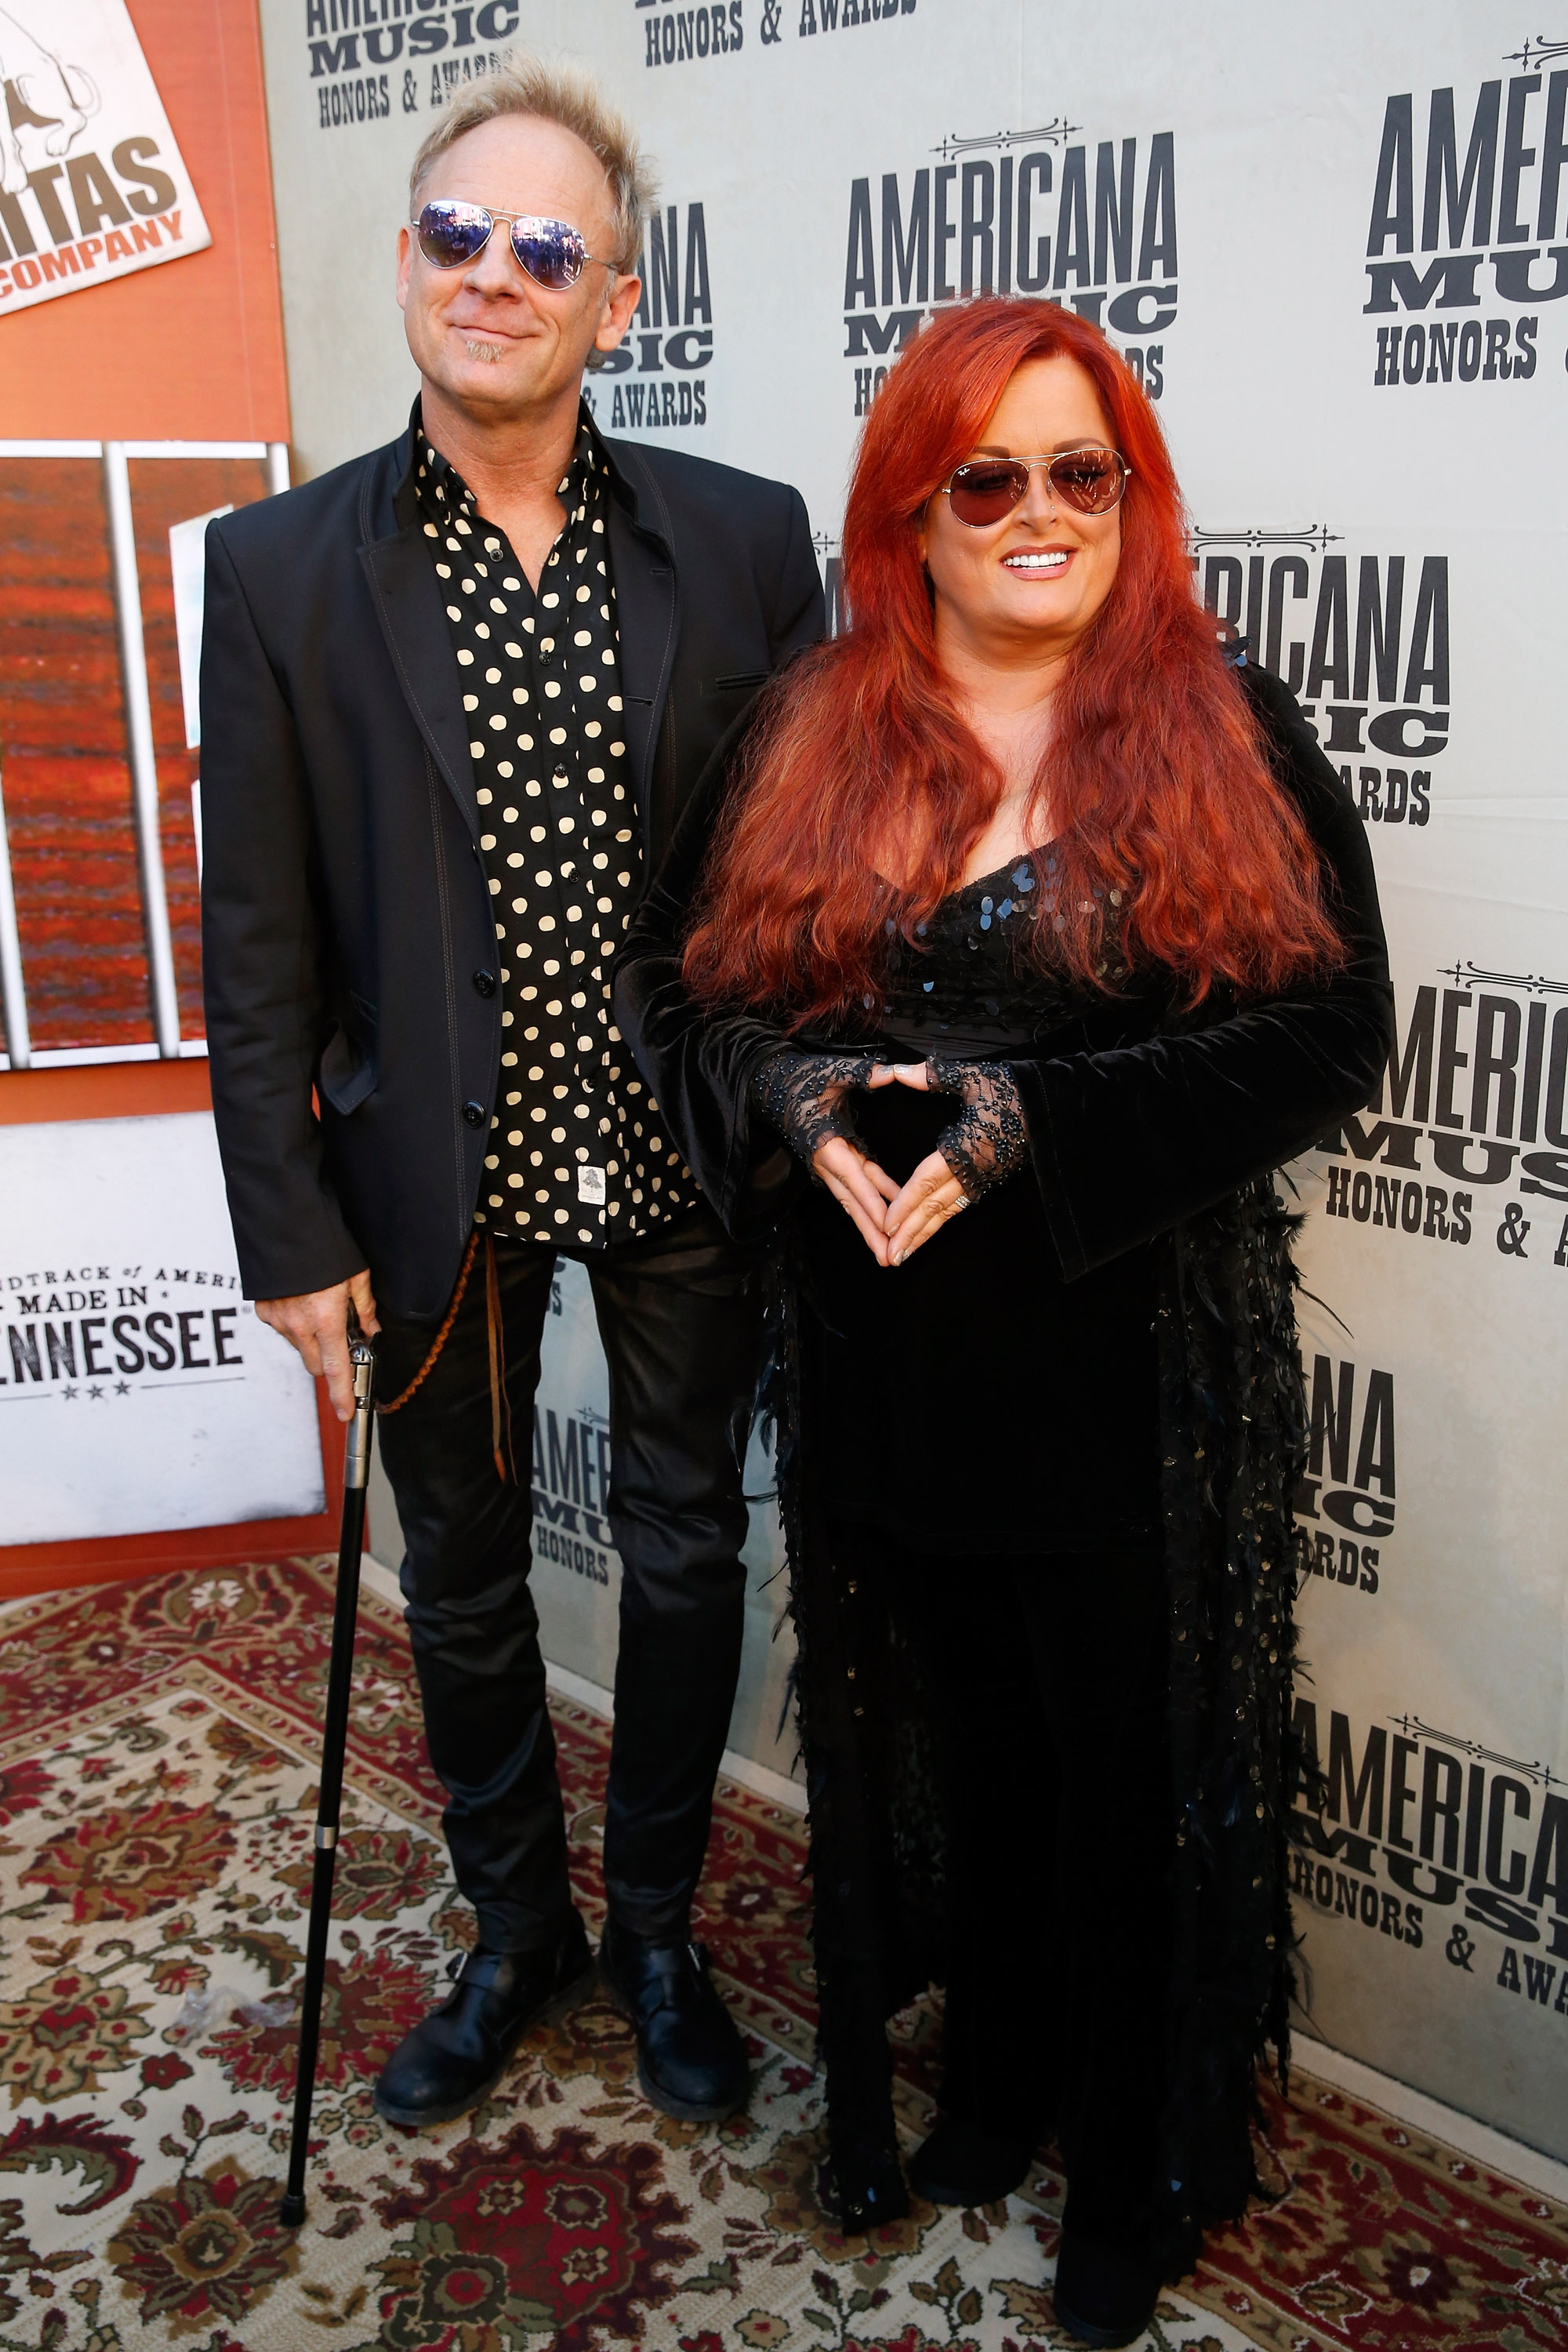 Cactus Moser and Wynonna Judd at the 2016 Americana Honors & Awards in Nashville, 2016 | Source: Getty Images